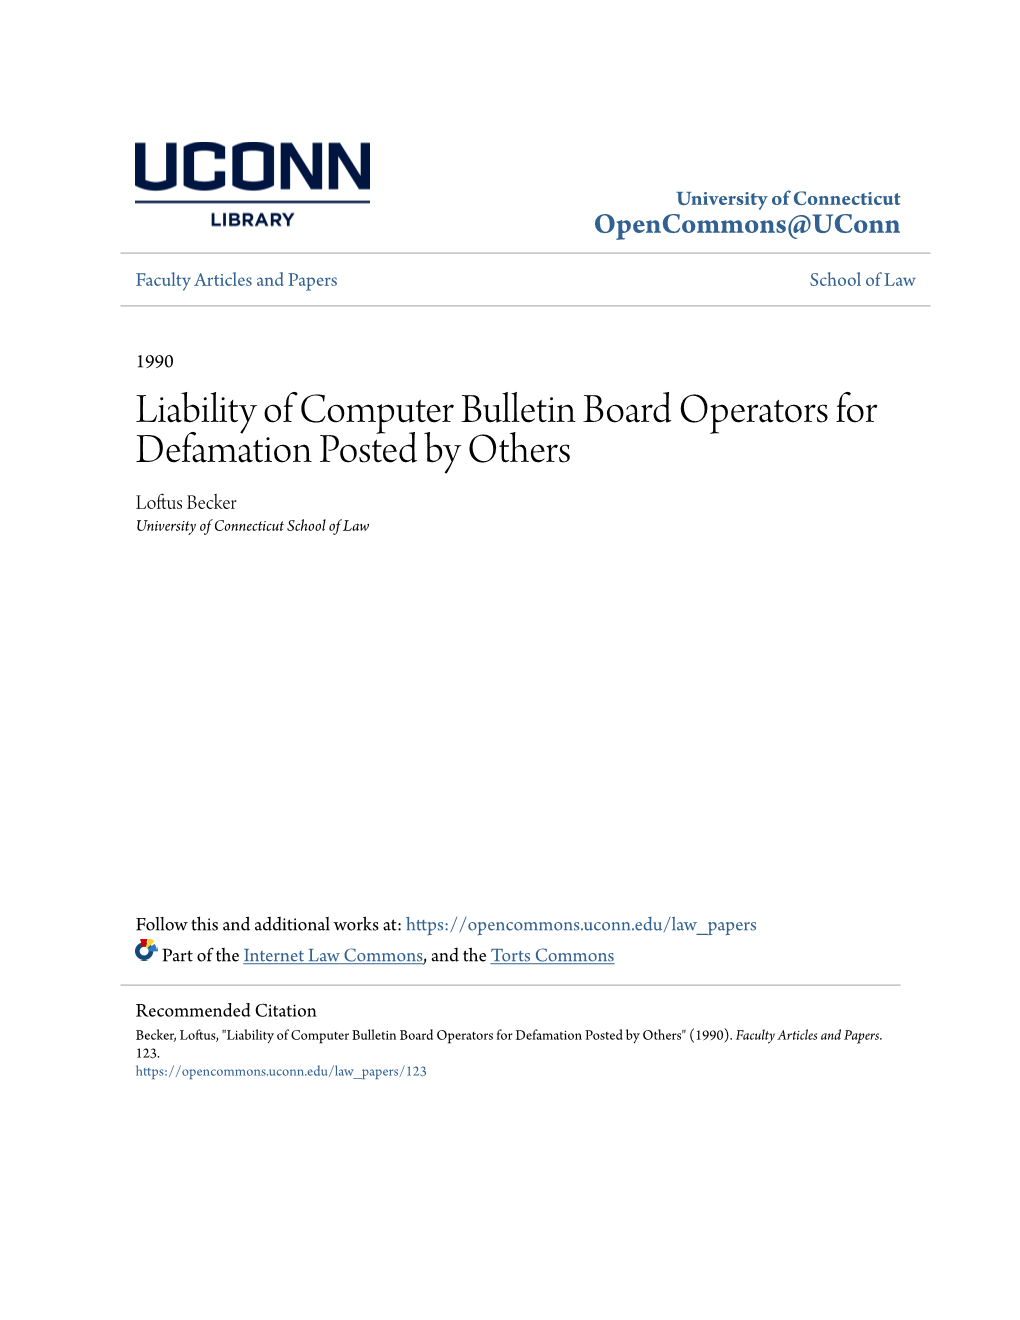 Liability of Computer Bulletin Board Operators for Defamation Posted by Others Loftus Becker University of Connecticut School of Law